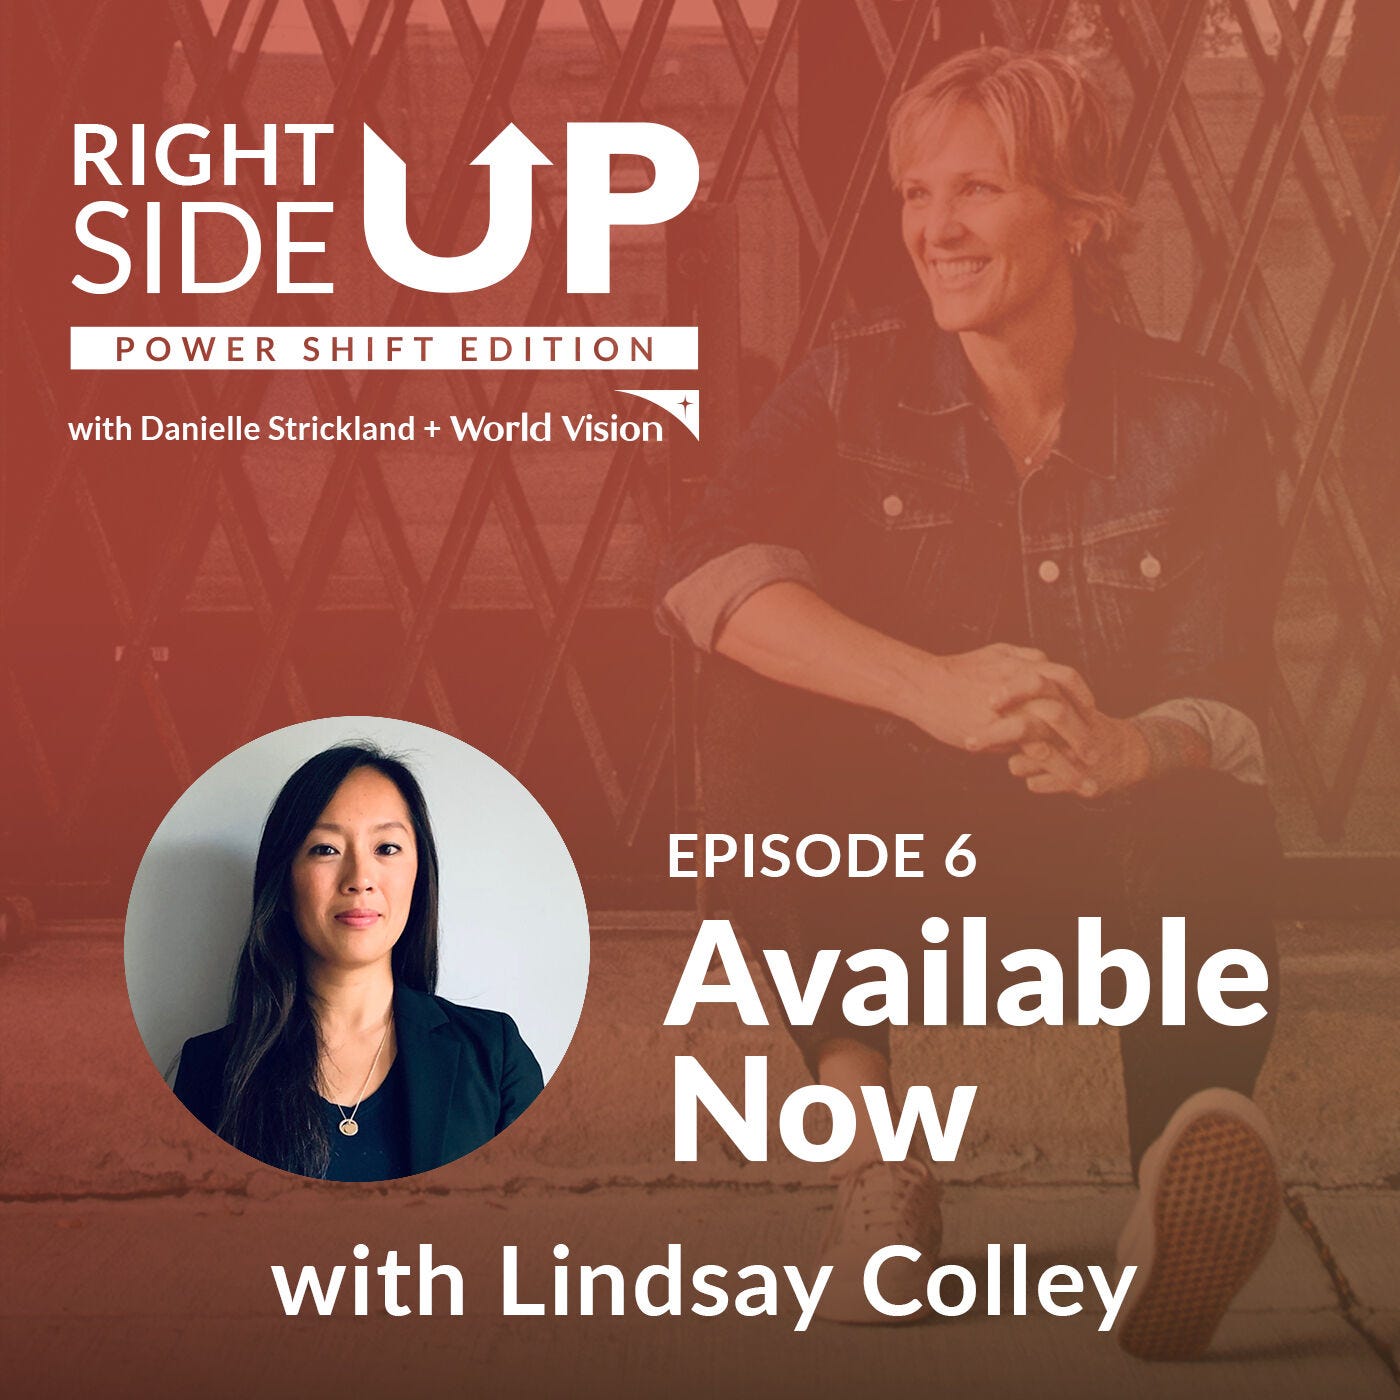 Power Shift Edition: Interview with Lindsay Colley